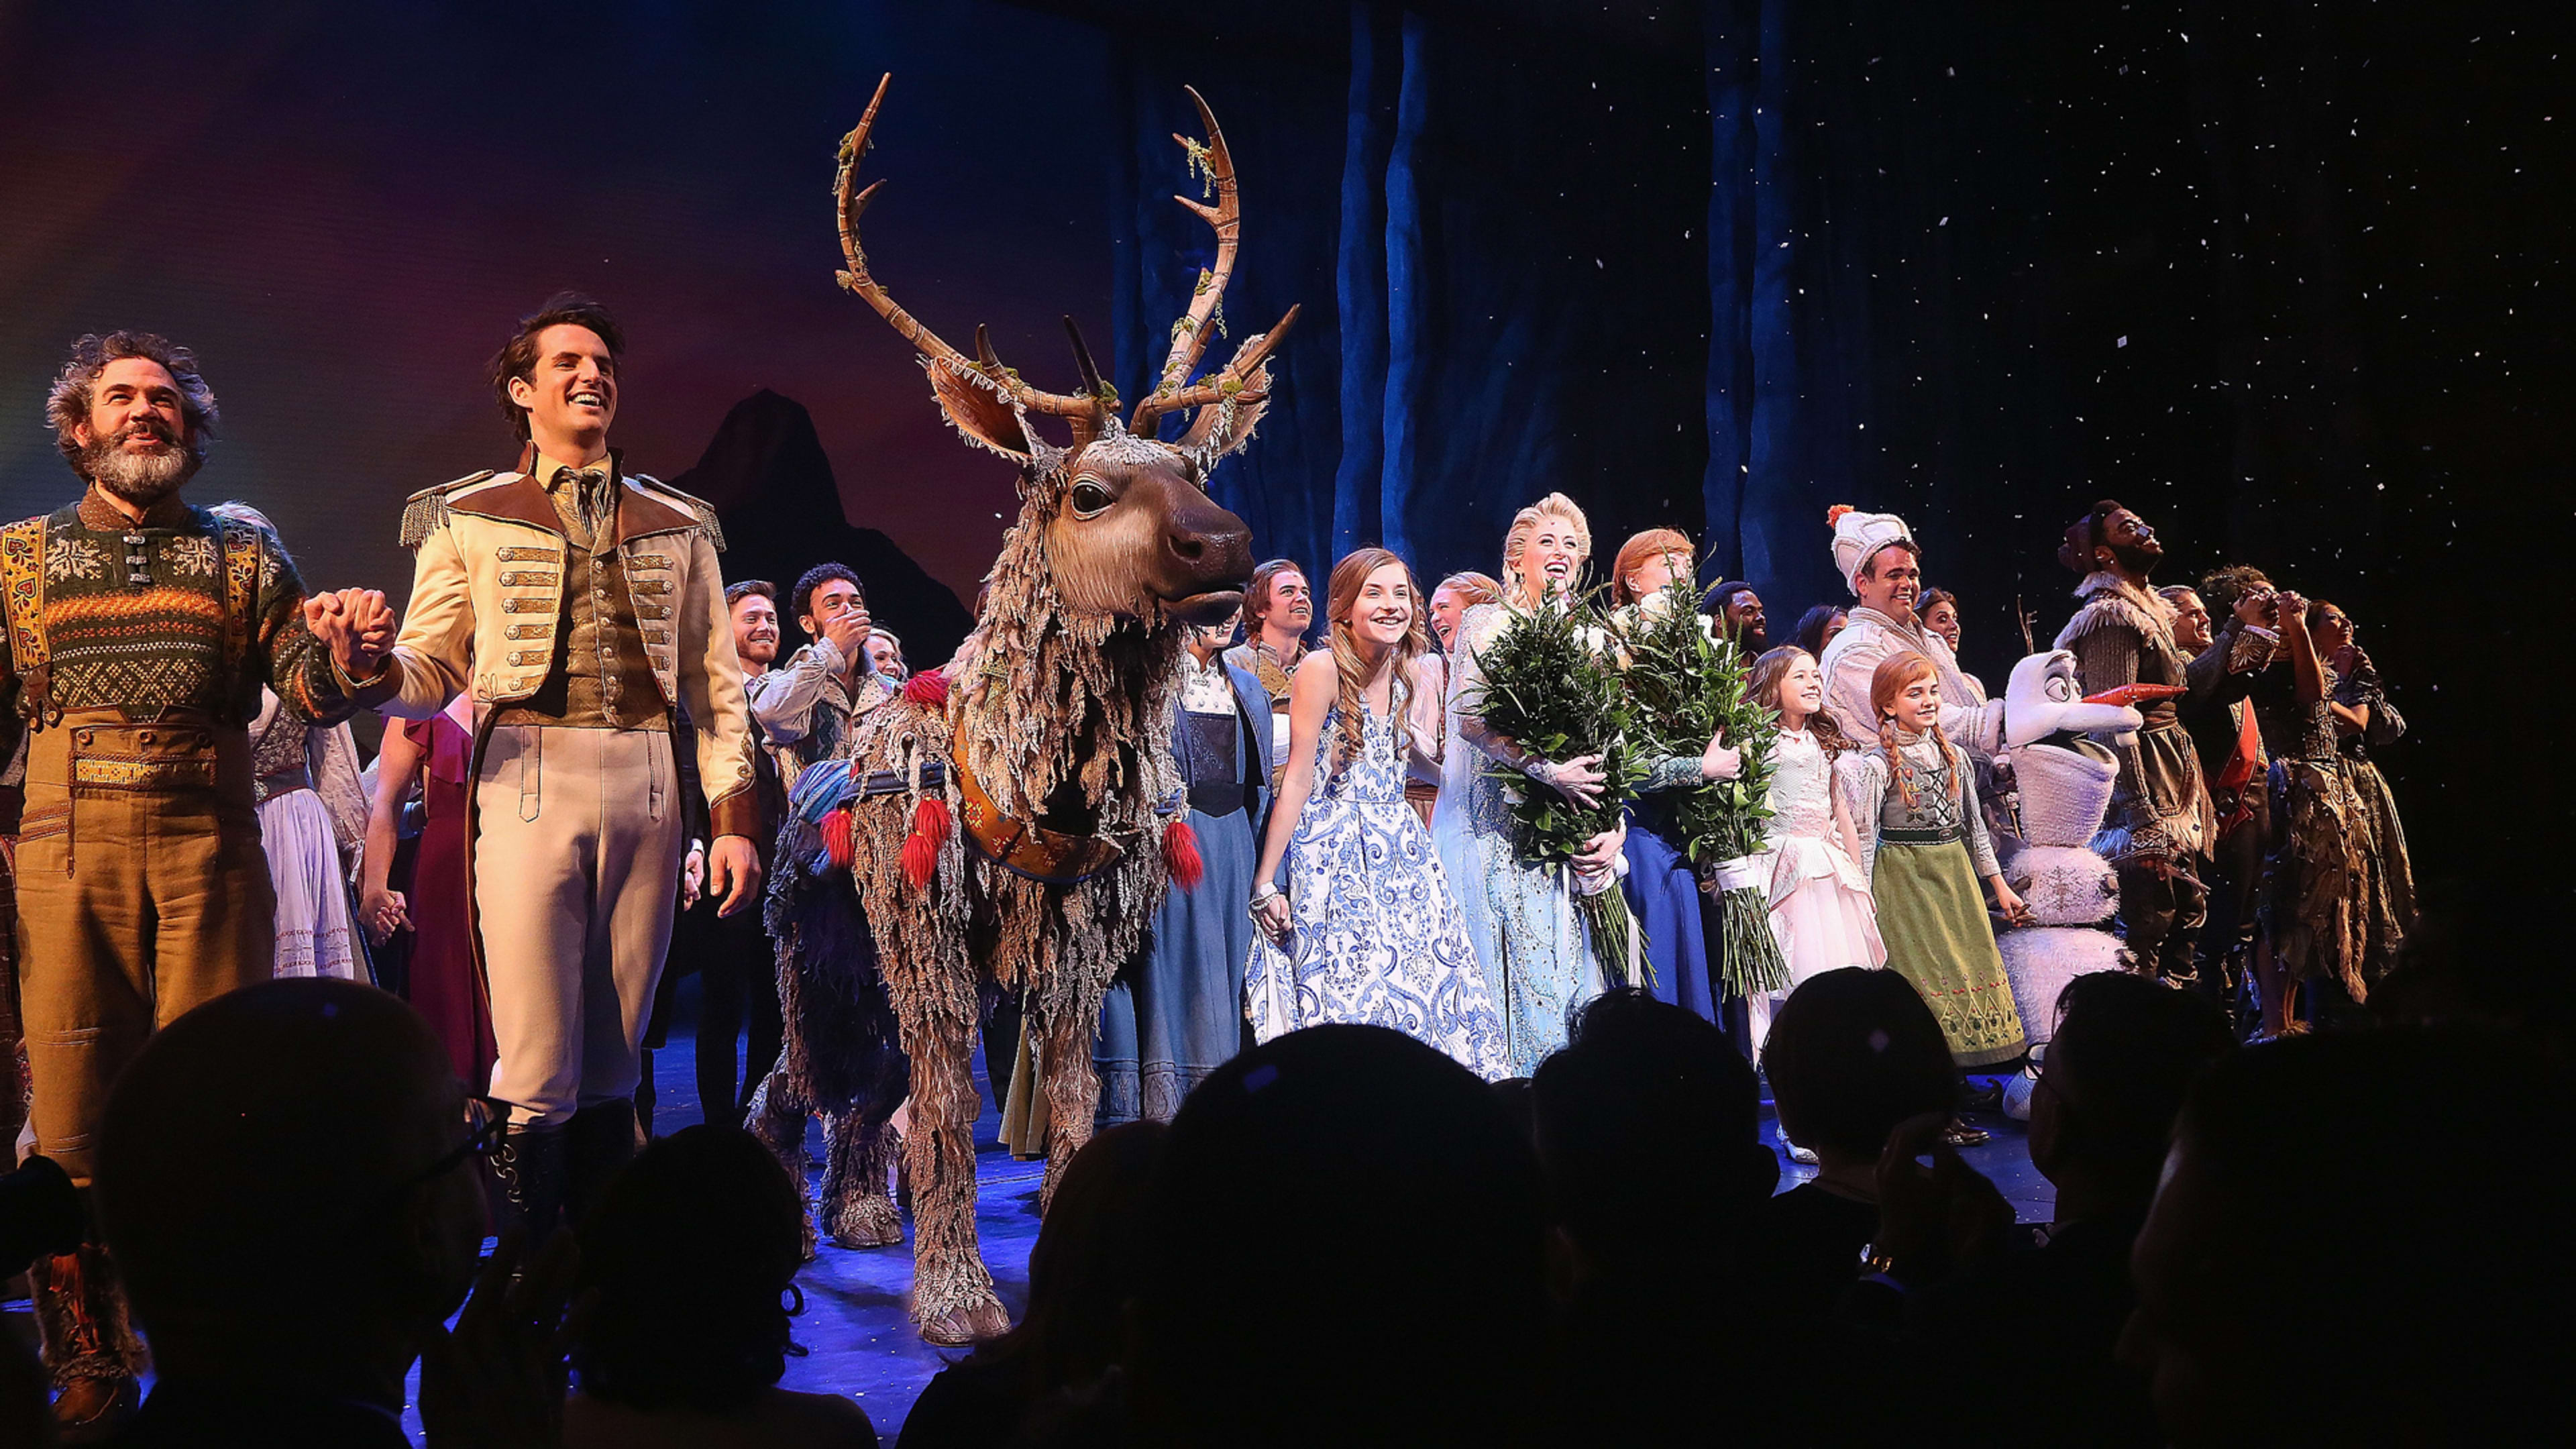 For Disney Theatrical, video fuels the Broadway star